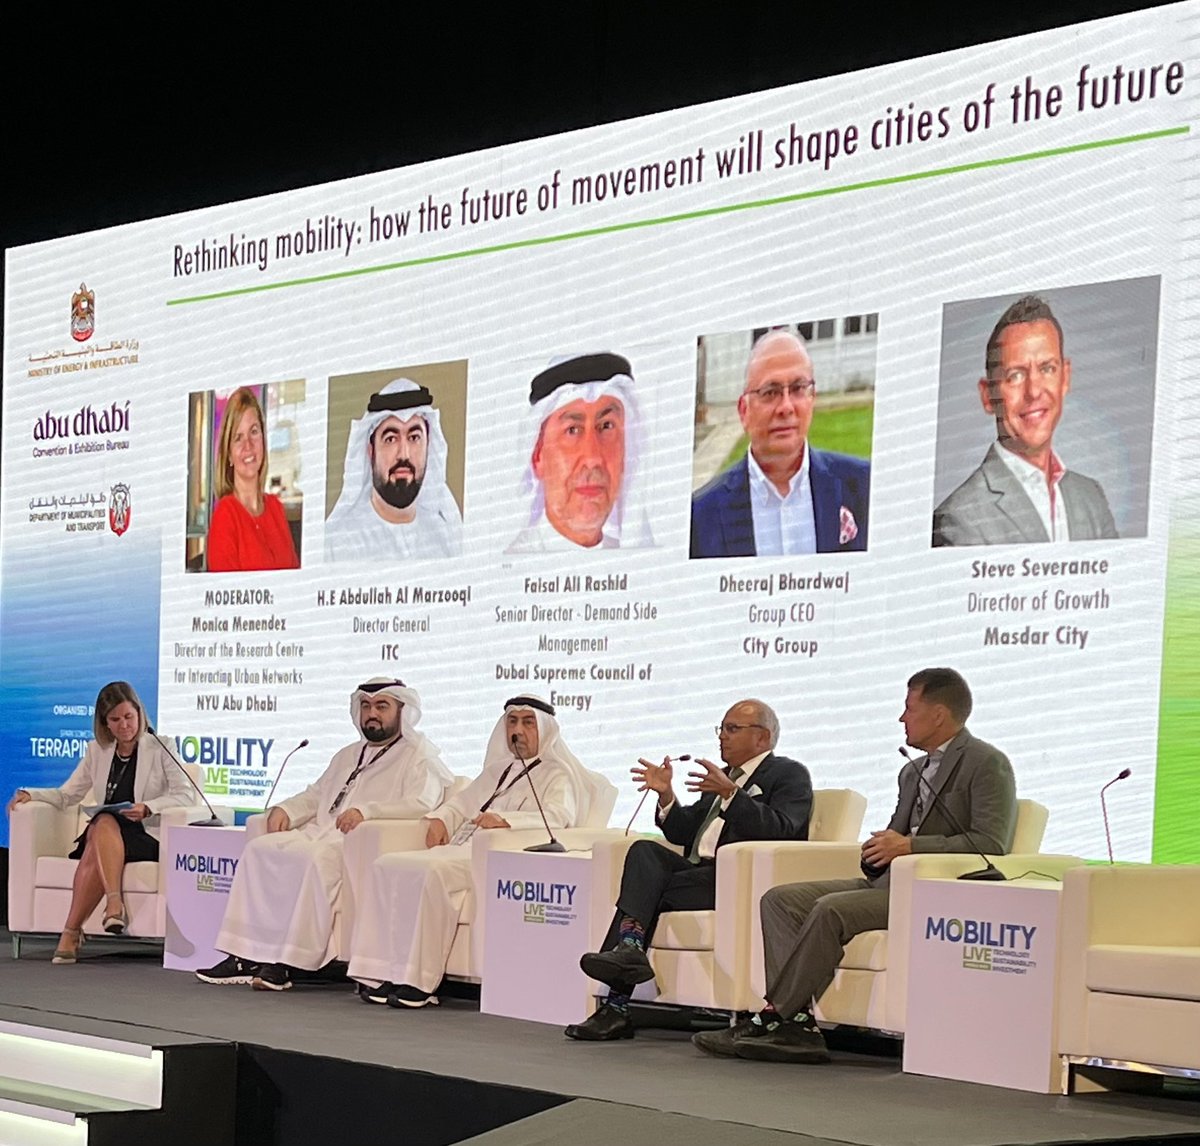 Shared our vision to develop a highly #efficient, #sustainable and #attractive  #transport system that is tailored-made to user’s need moving away from vehicle ownership. 

#Bringing_cities_to_life 

@citylinkkuwait @citybuskw @MobilityLiveME 

@UITPMENA #kuwaitnews #kuwait